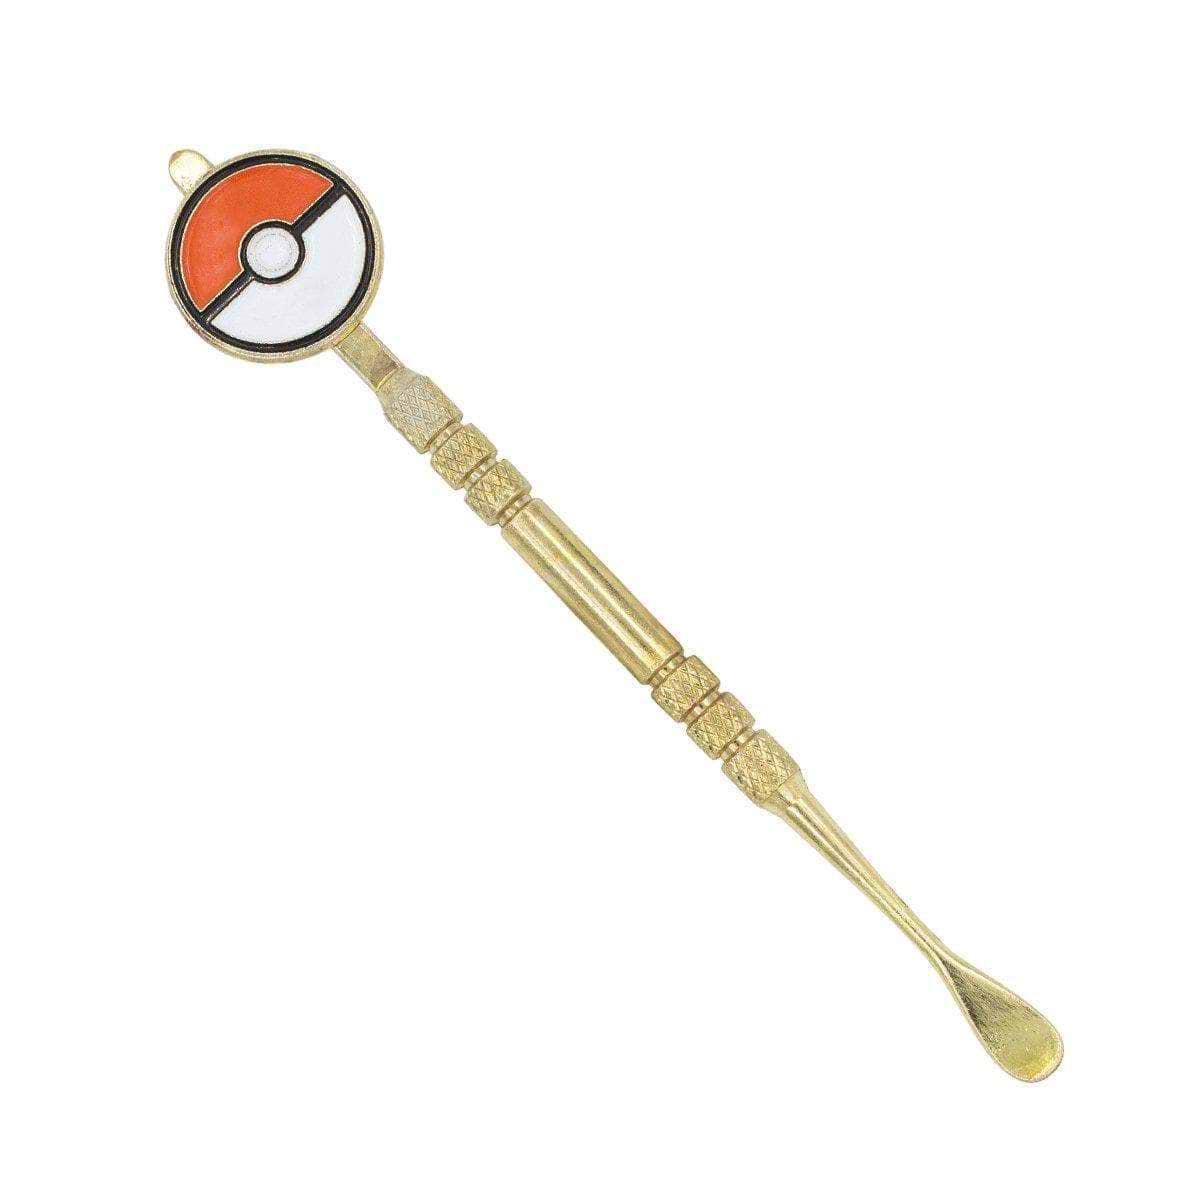 Handy stainless steel dab tool smoking accessory textured middle part for easy grip with Pokeball Pokeman design on handle